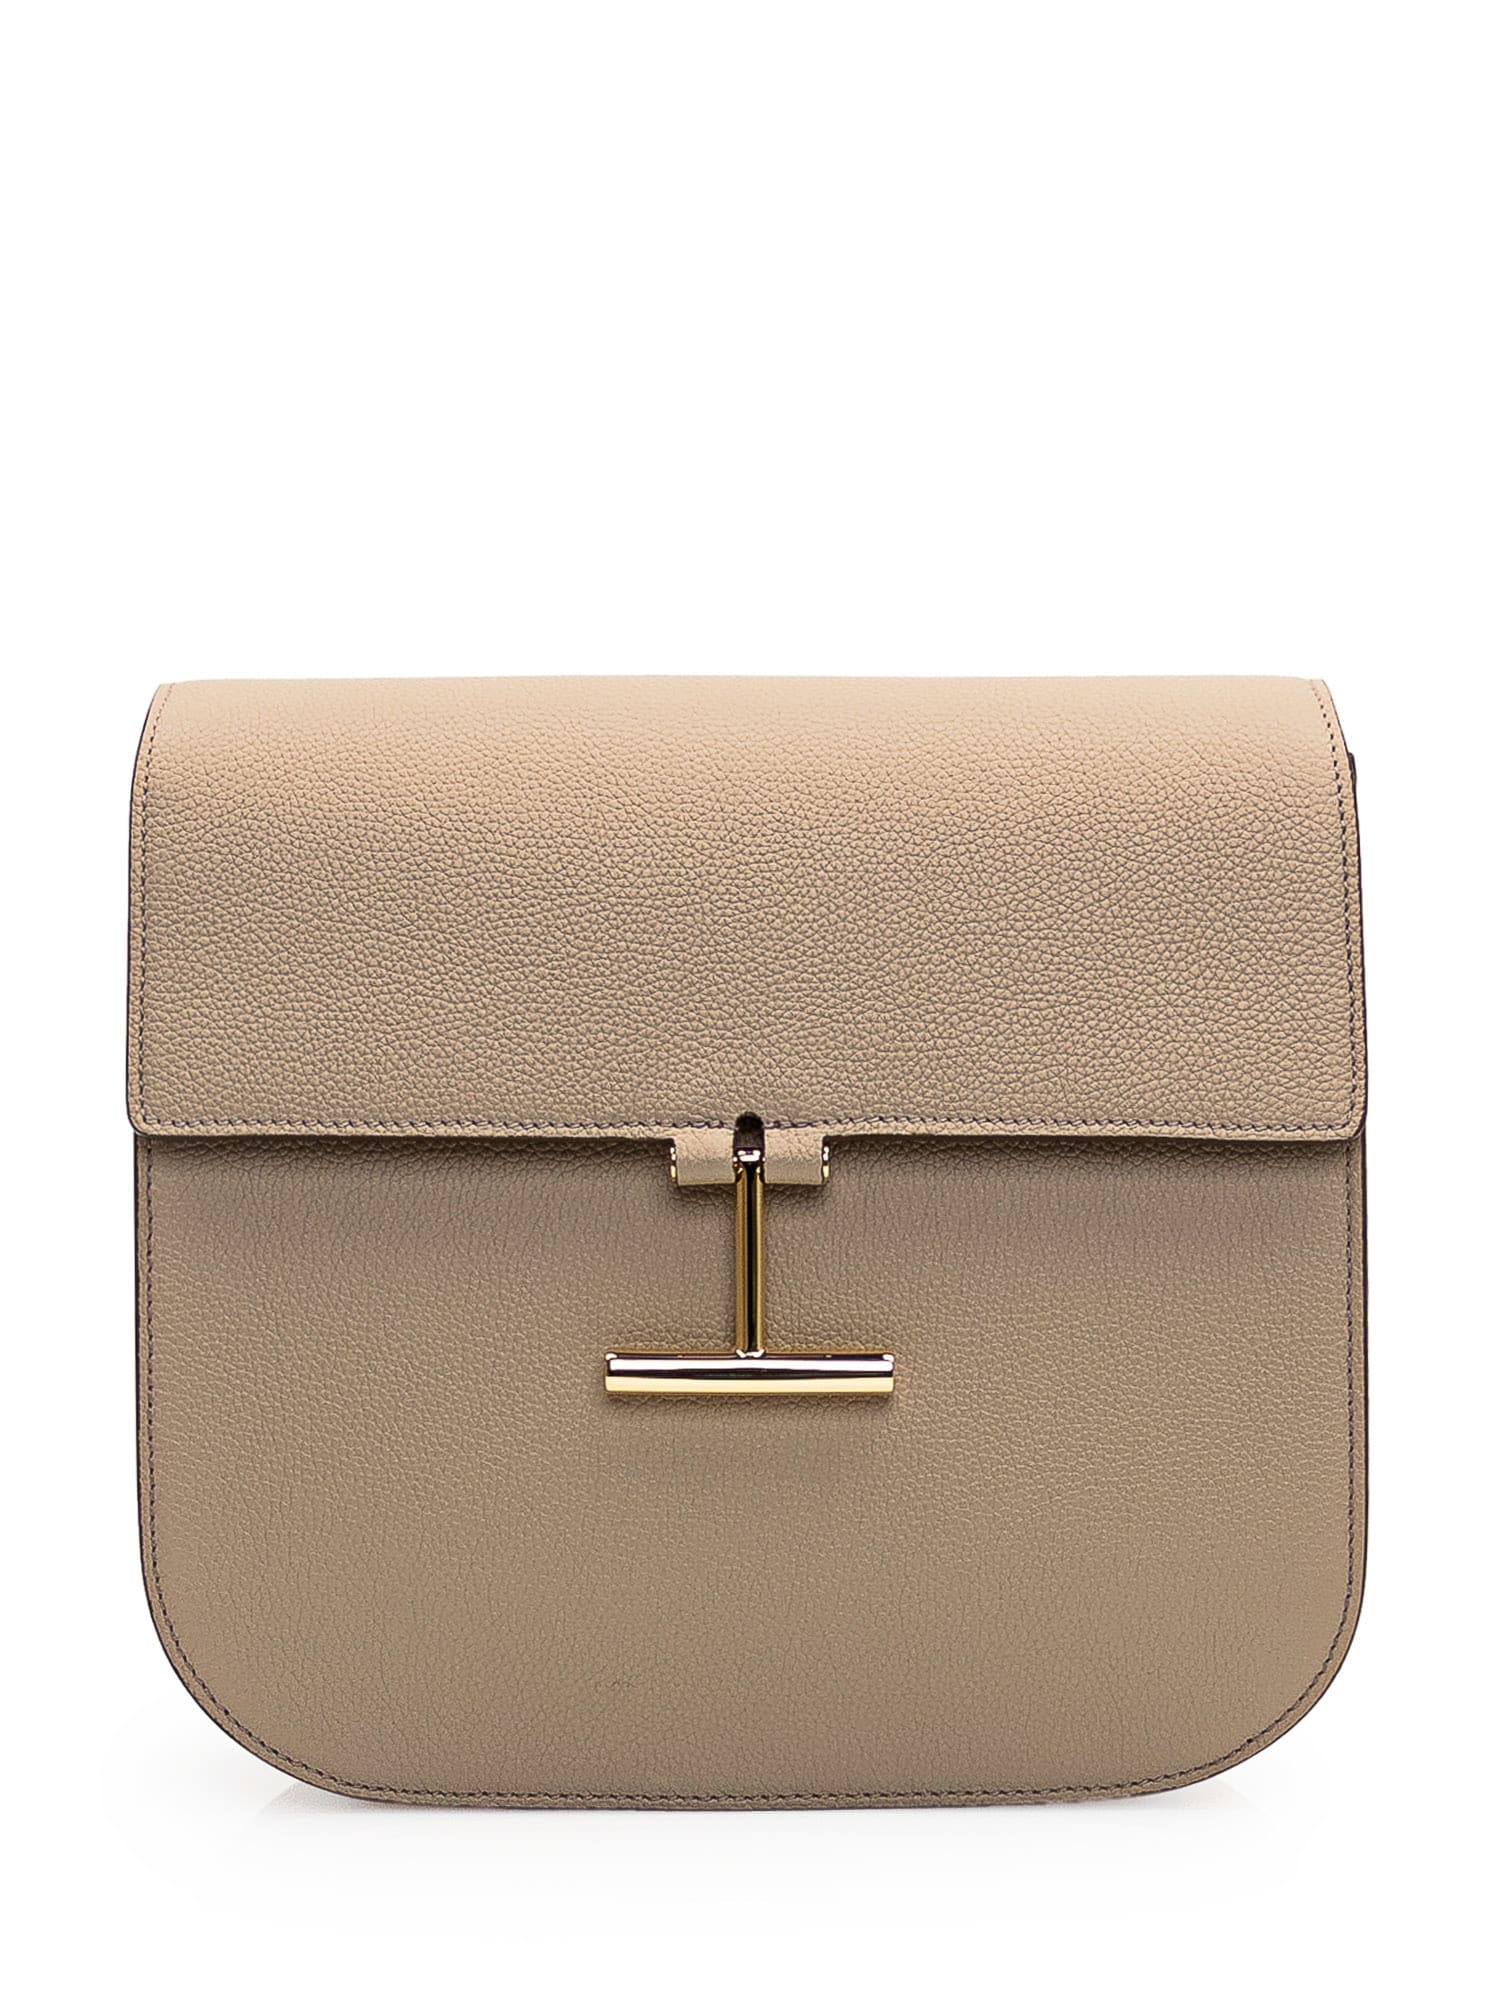 Tom Ford Leather Bag In Beige